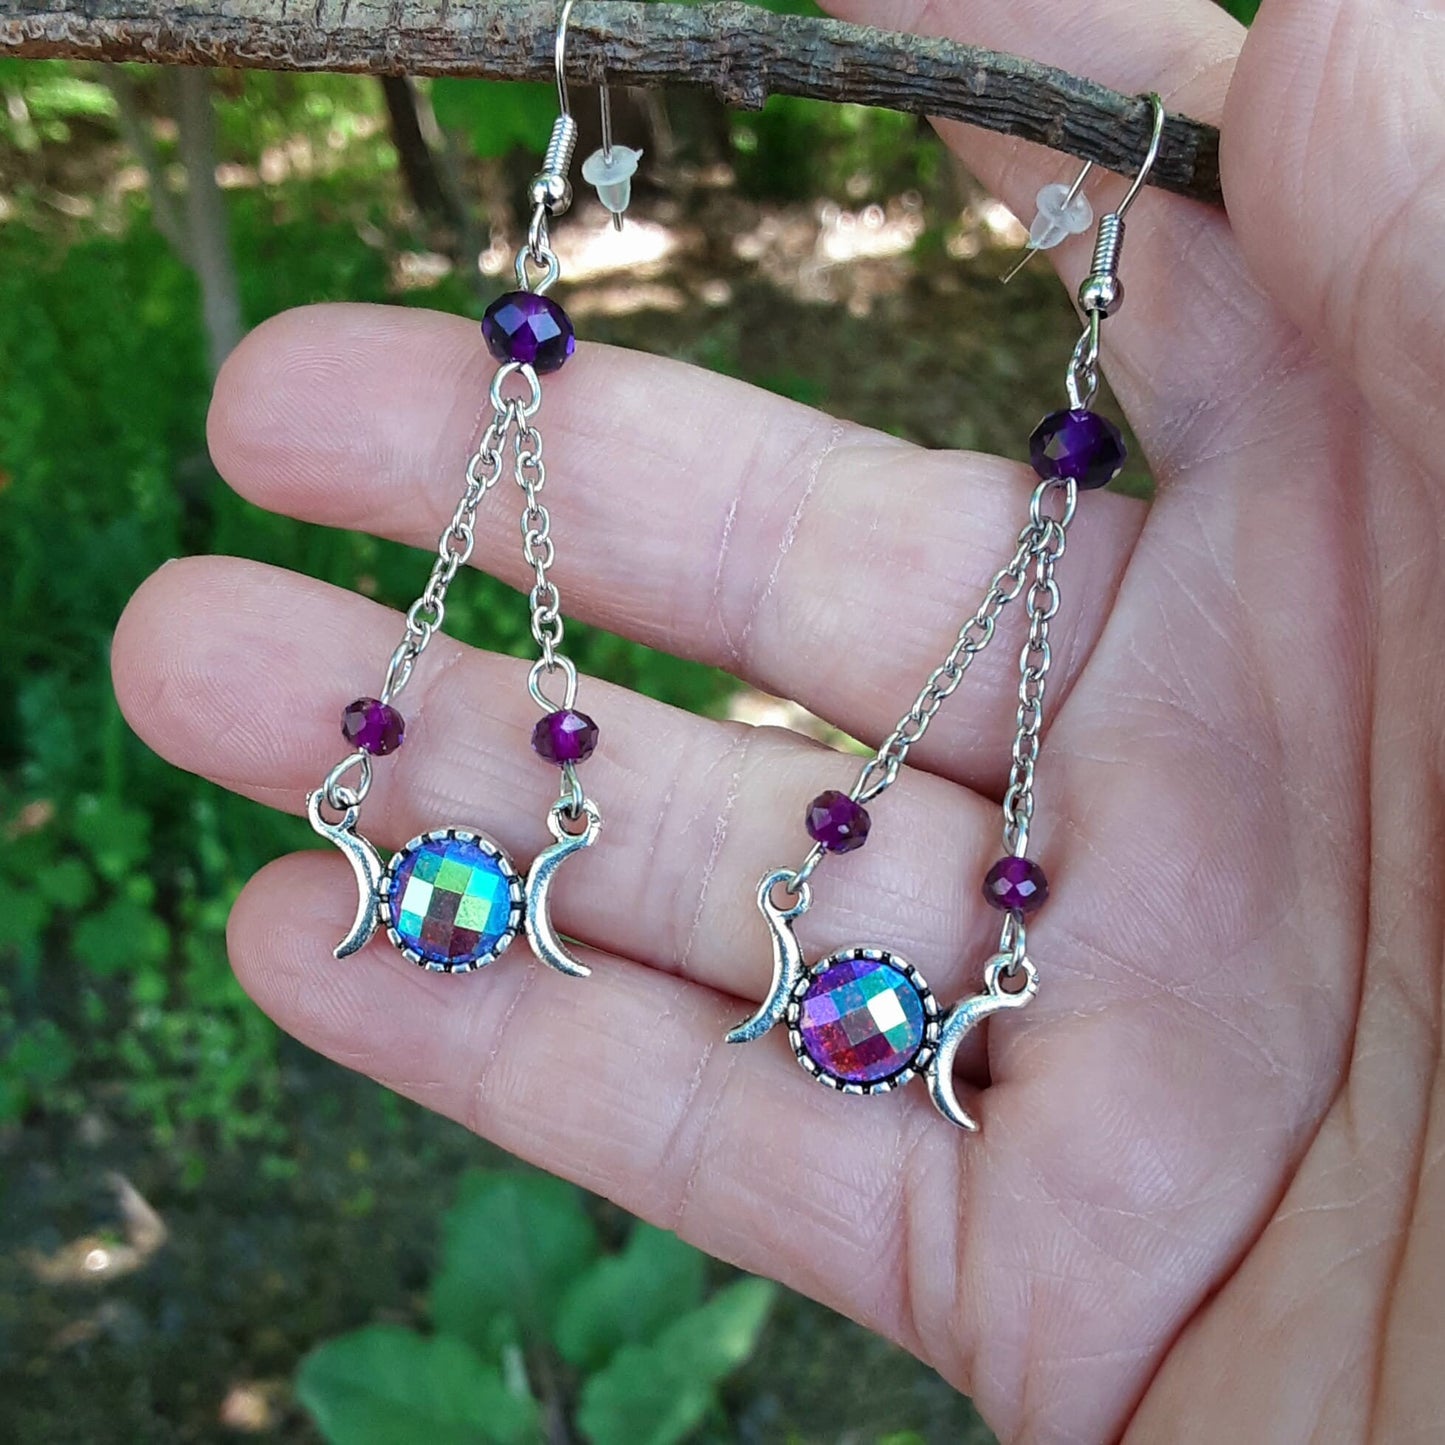 Hekate Earrings Chandelier Triple Moon Goddess Purple crystal detailed Witchy Jewelry Pagan Gift idea